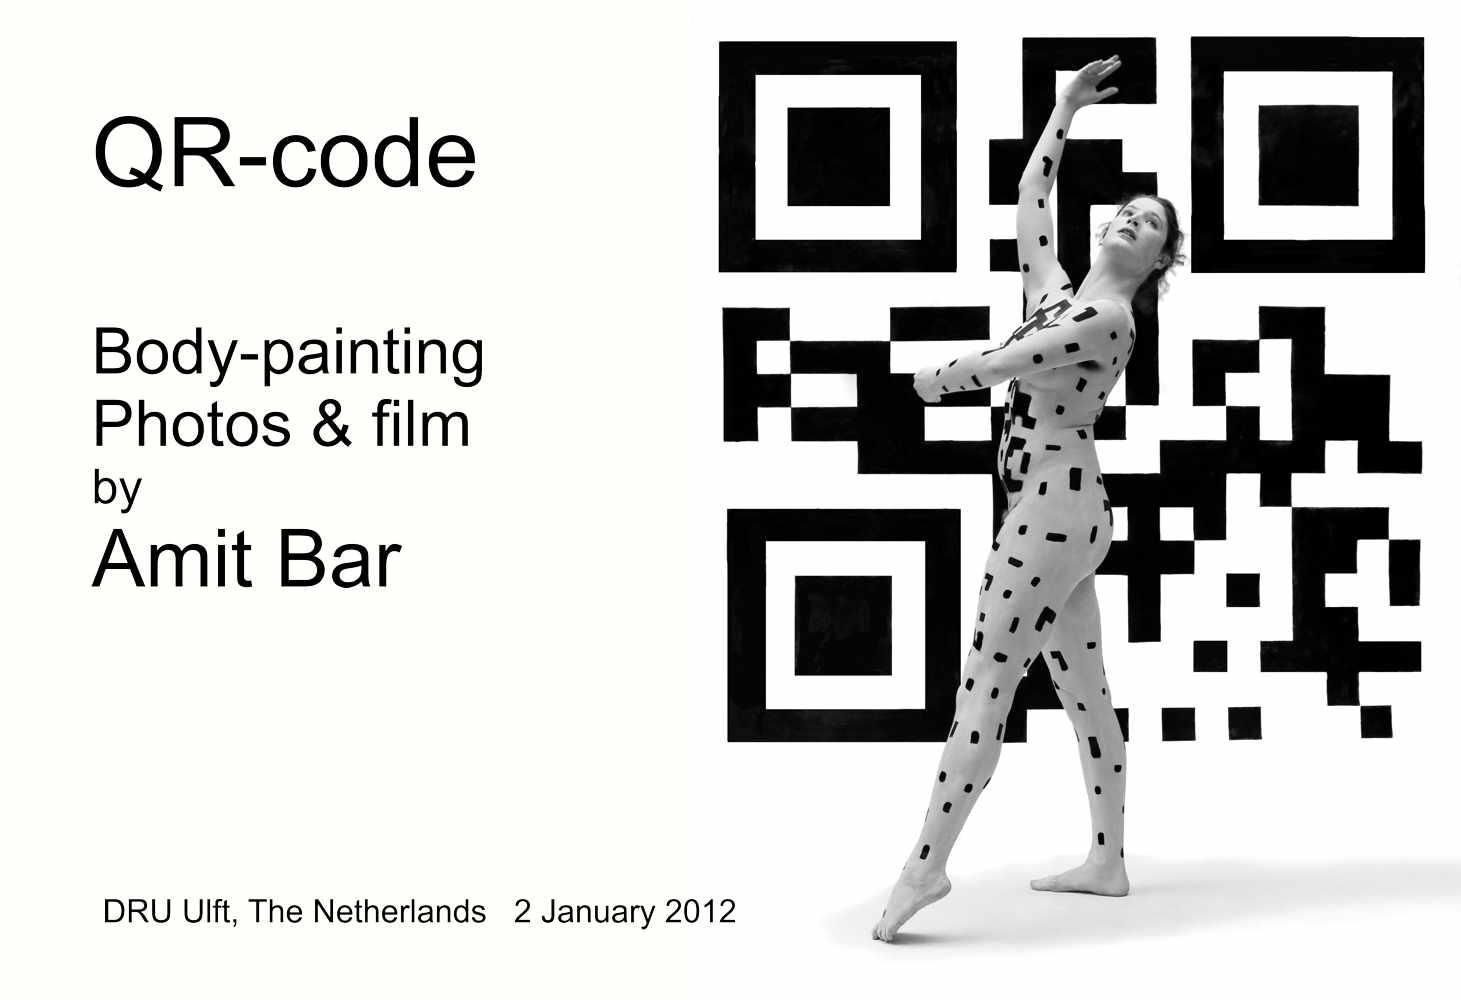 QR-code video: Bodypainting of the QR-Code which displays the name of the maker, Amit Bar. Model and dancer Eline dances to the music of Vivaldi.